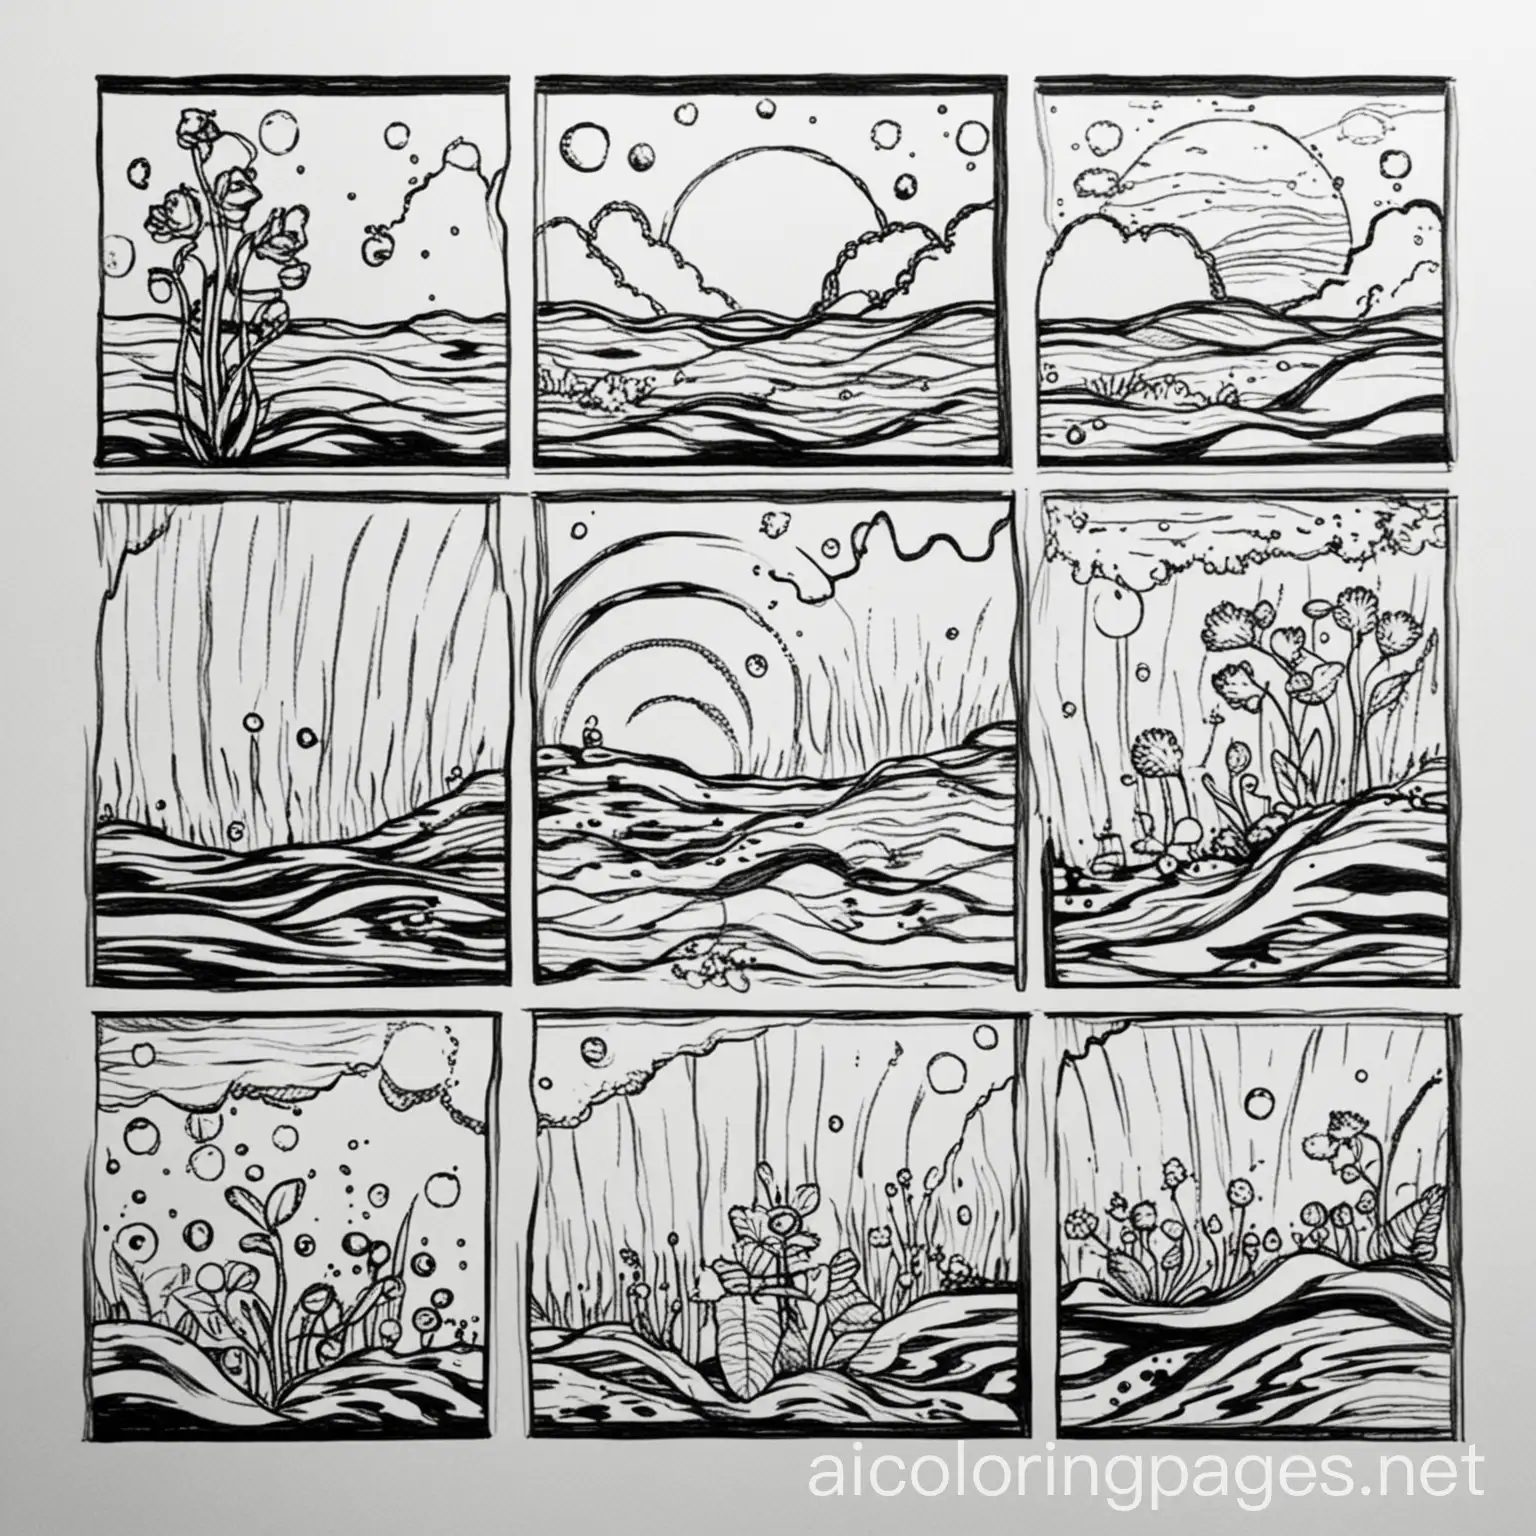 water collage, Coloring Page, black and white, line art, white background, Simplicity, Ample White Space. The background of the coloring page is plain white to make it easy for young children to color within the lines. The outlines of all the subjects are easy to distinguish, making it simple for kids to color without too much difficulty